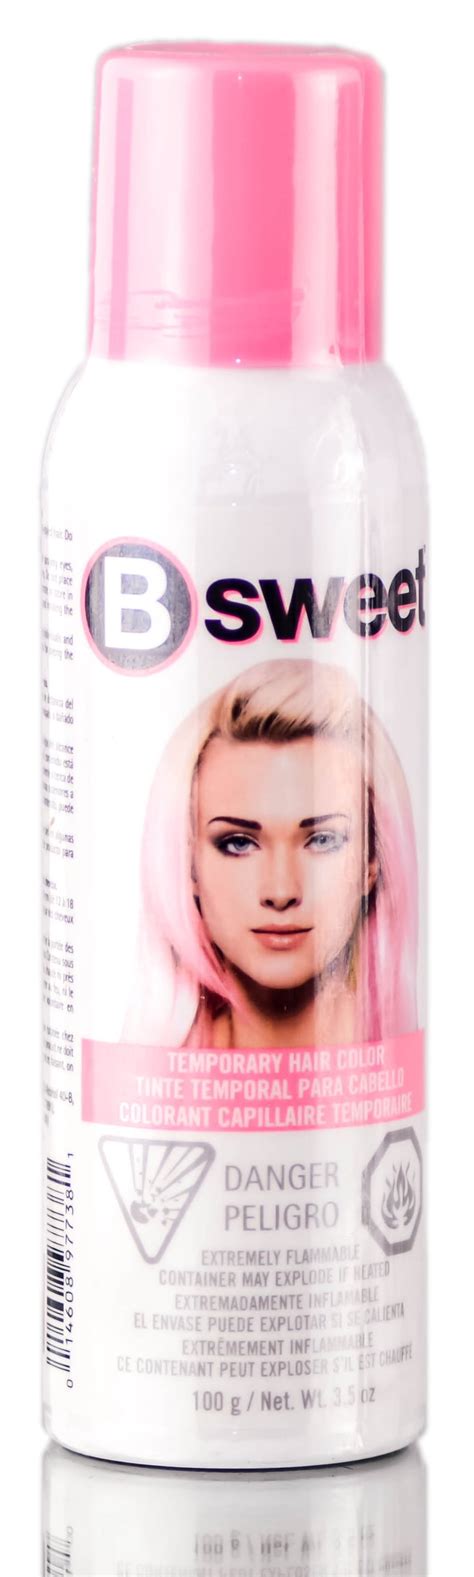 Jerome Russell B Sweet Temporary Hair Color Pale Pink Pack Of 6